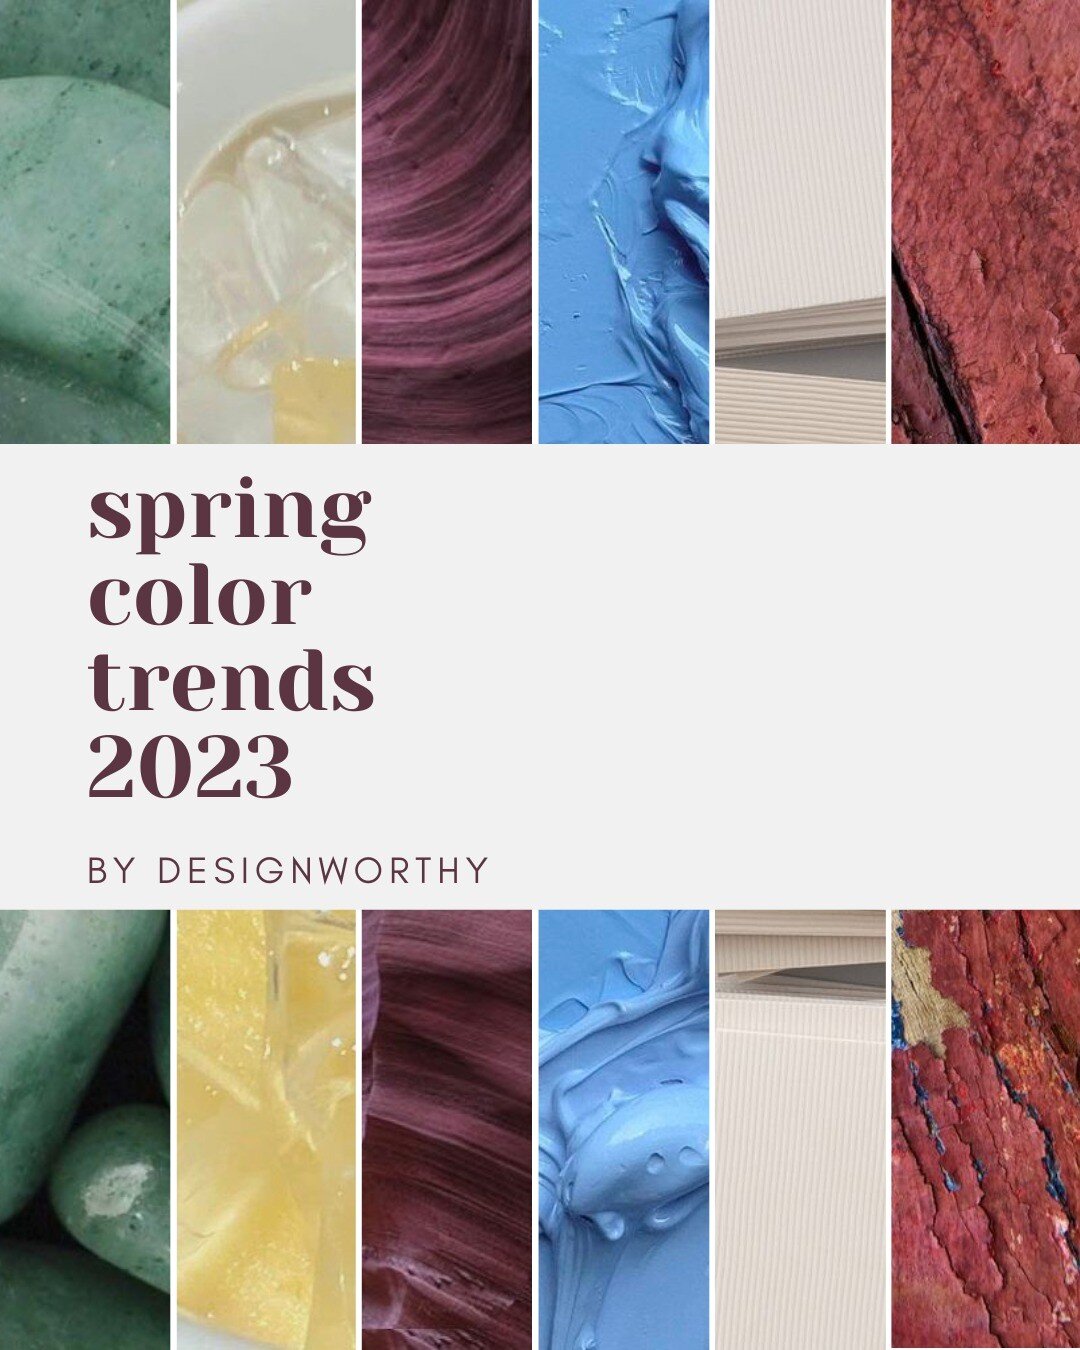 ✨ NEW SERIES: Spring Color Trends for 2023! ✨ Color is one of the most impactful elements in any interior design plan - it adds interest and contrast, creates a mood, and is a fantastic way to showcase your personal aesthetic. Over the next week, we 